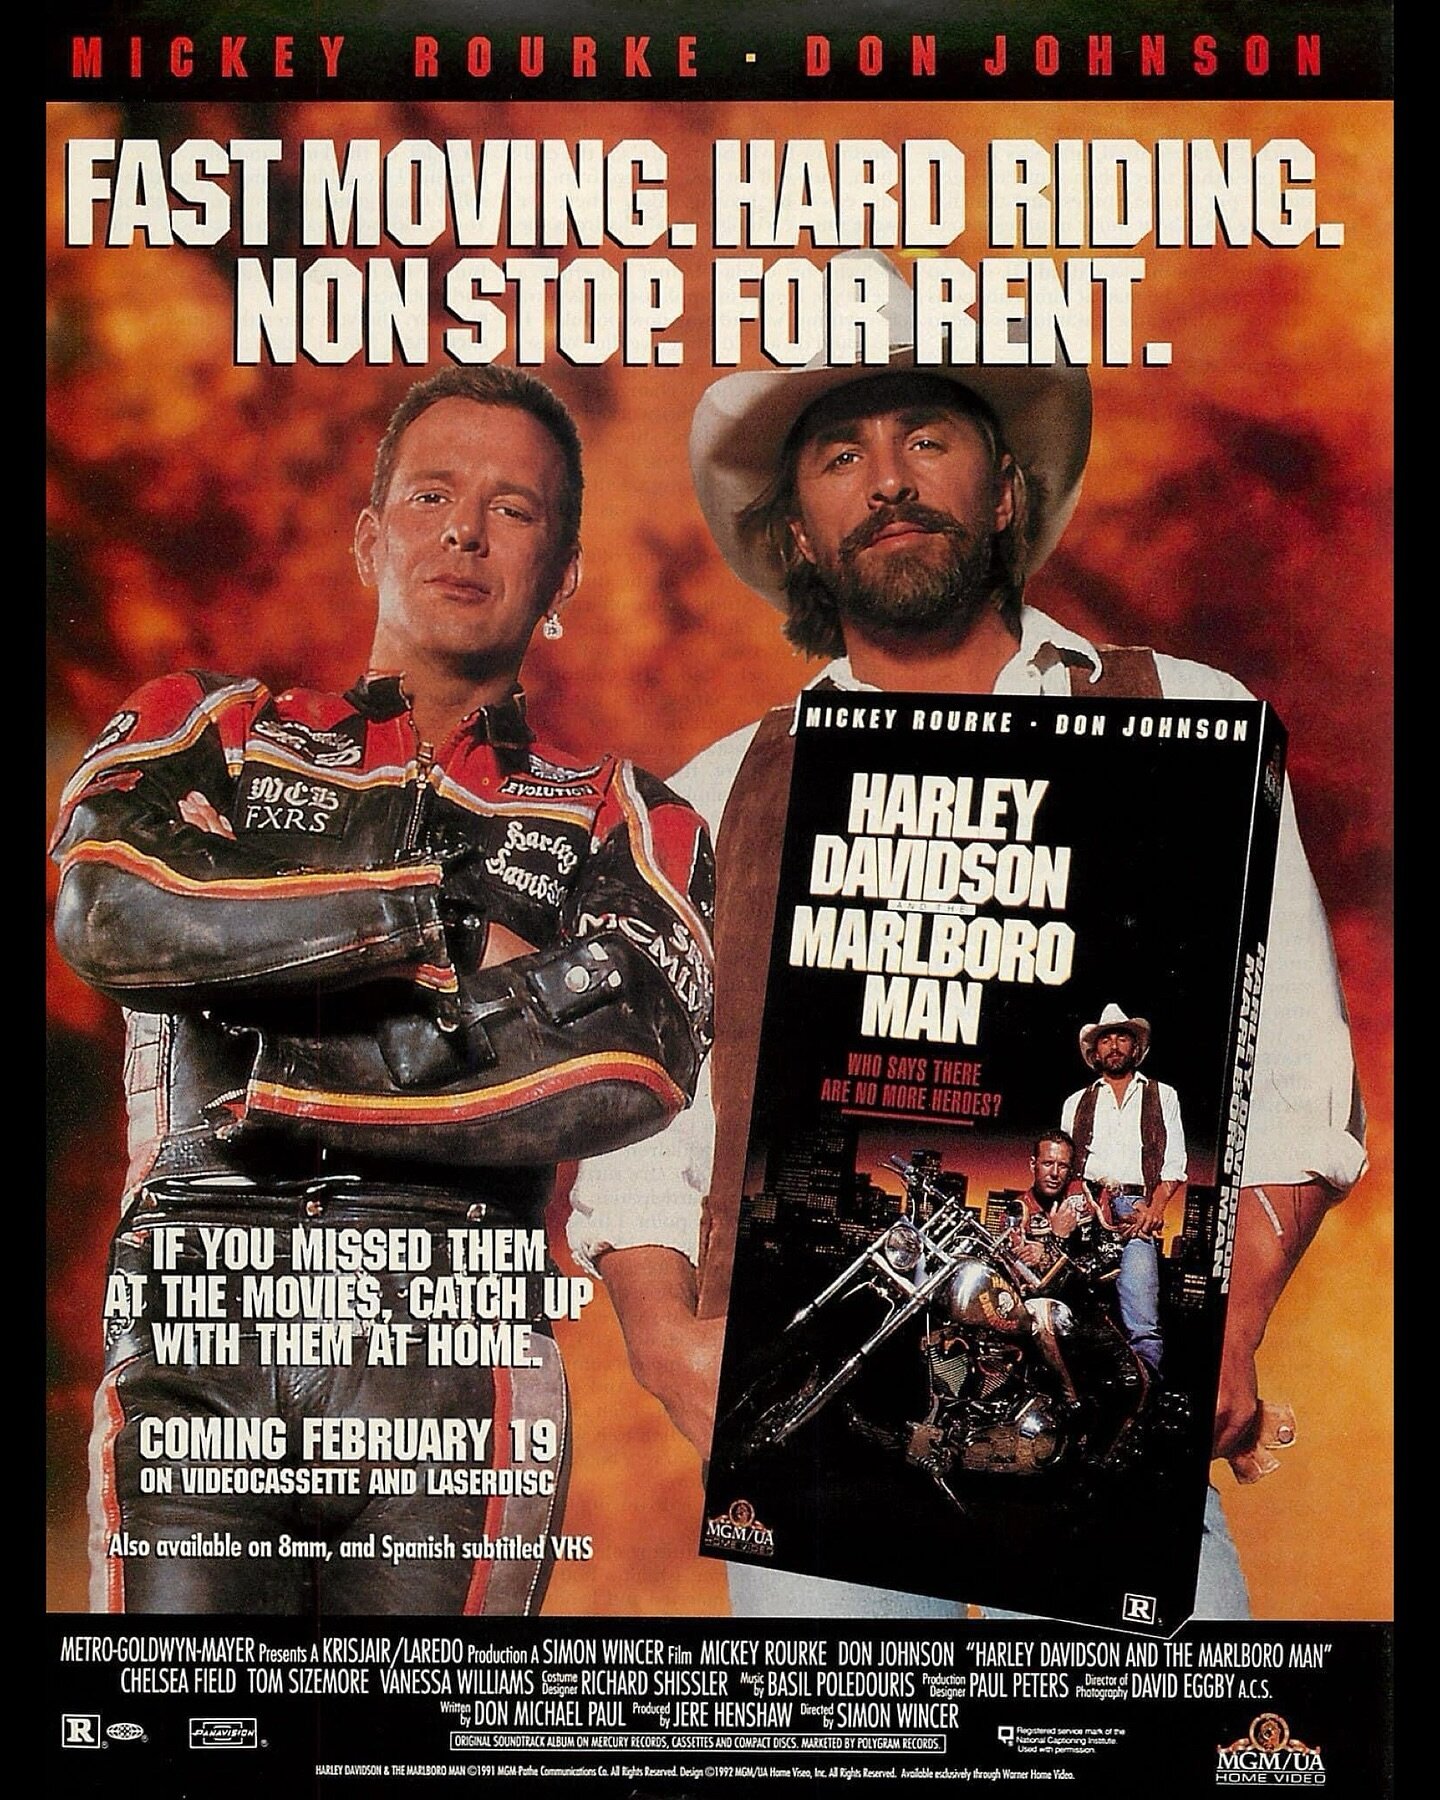 HARLEY DAVIDSON AND THE MARLBORO MAN was released on VHS in February of 1992! Who remembers renting it at their local video store?

Listen to our crossover review of HARLEY DAVIDSON AND THE MARLBORO MAN (1991) with @twodollarlatefee now on Spotify, A